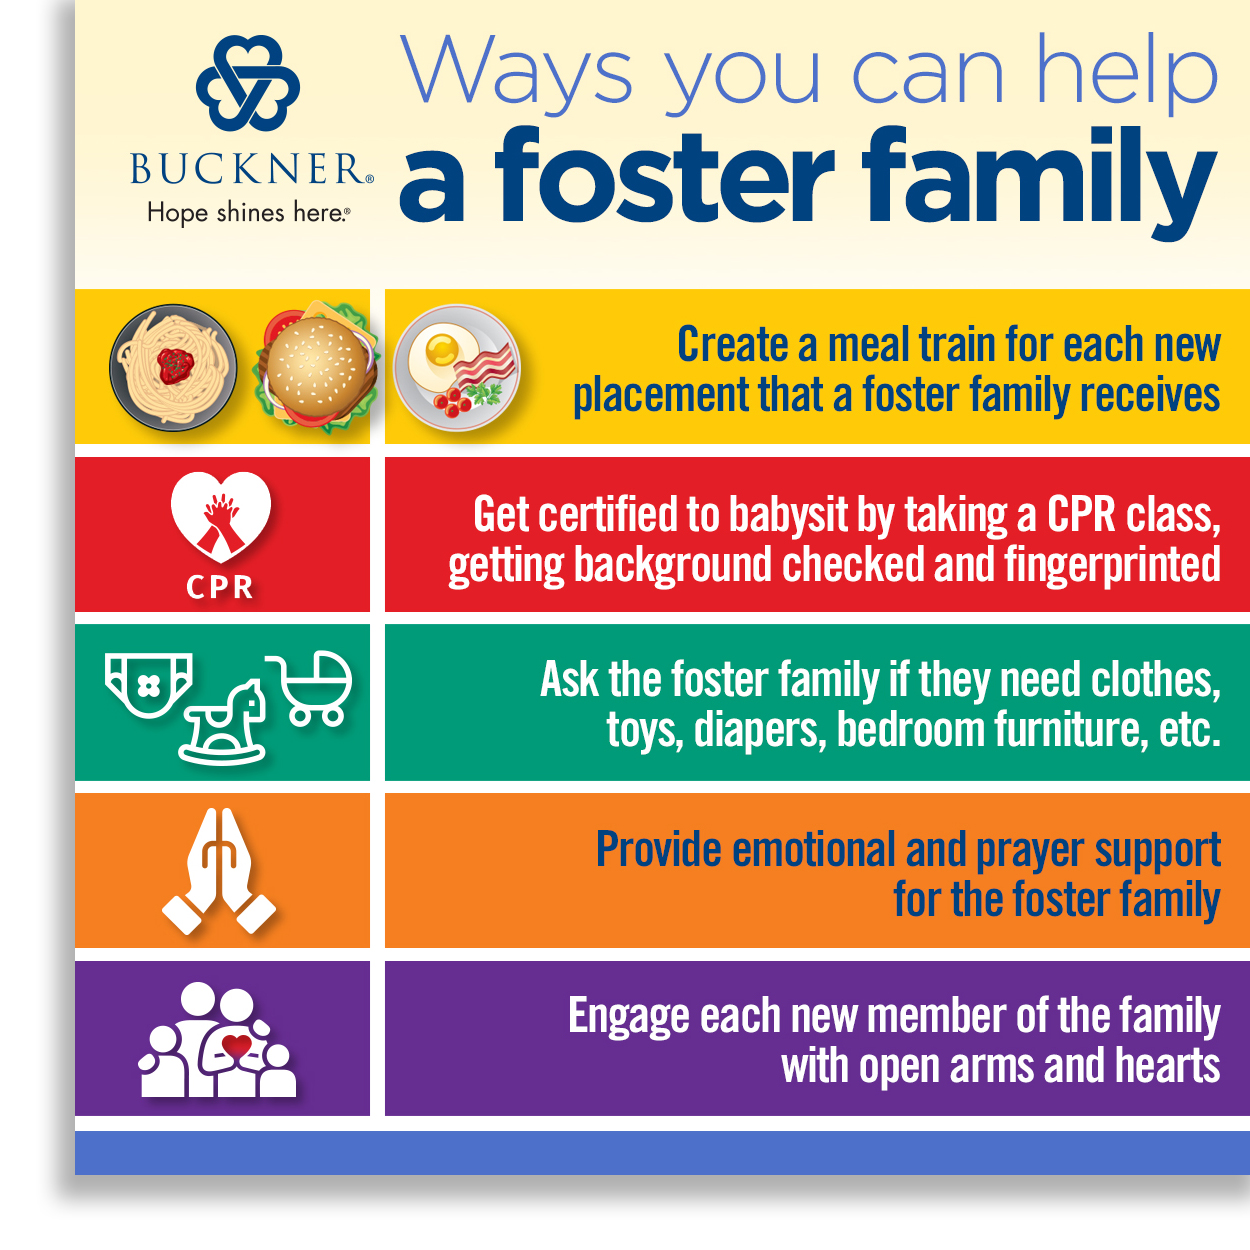 help-foster-families-by-providing-care-and-support.jpg